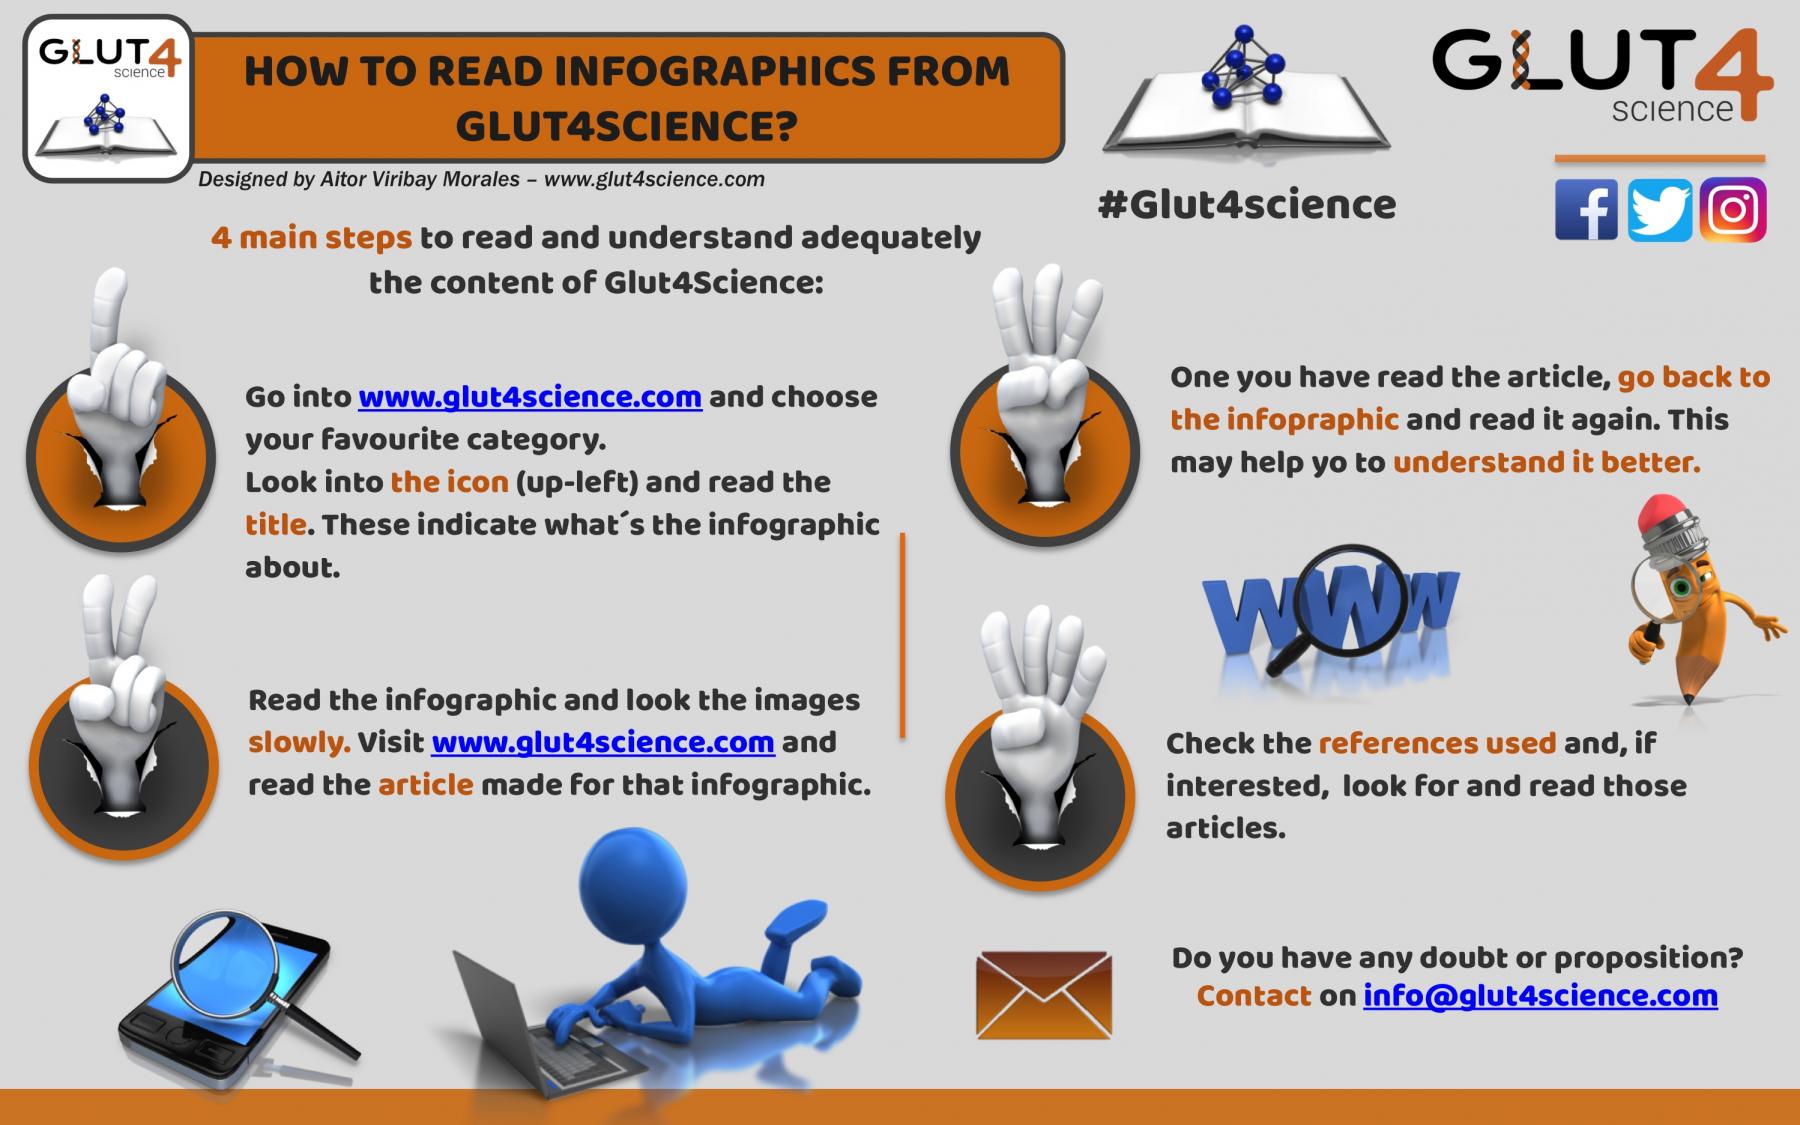 How to read Glut4Science infographic?